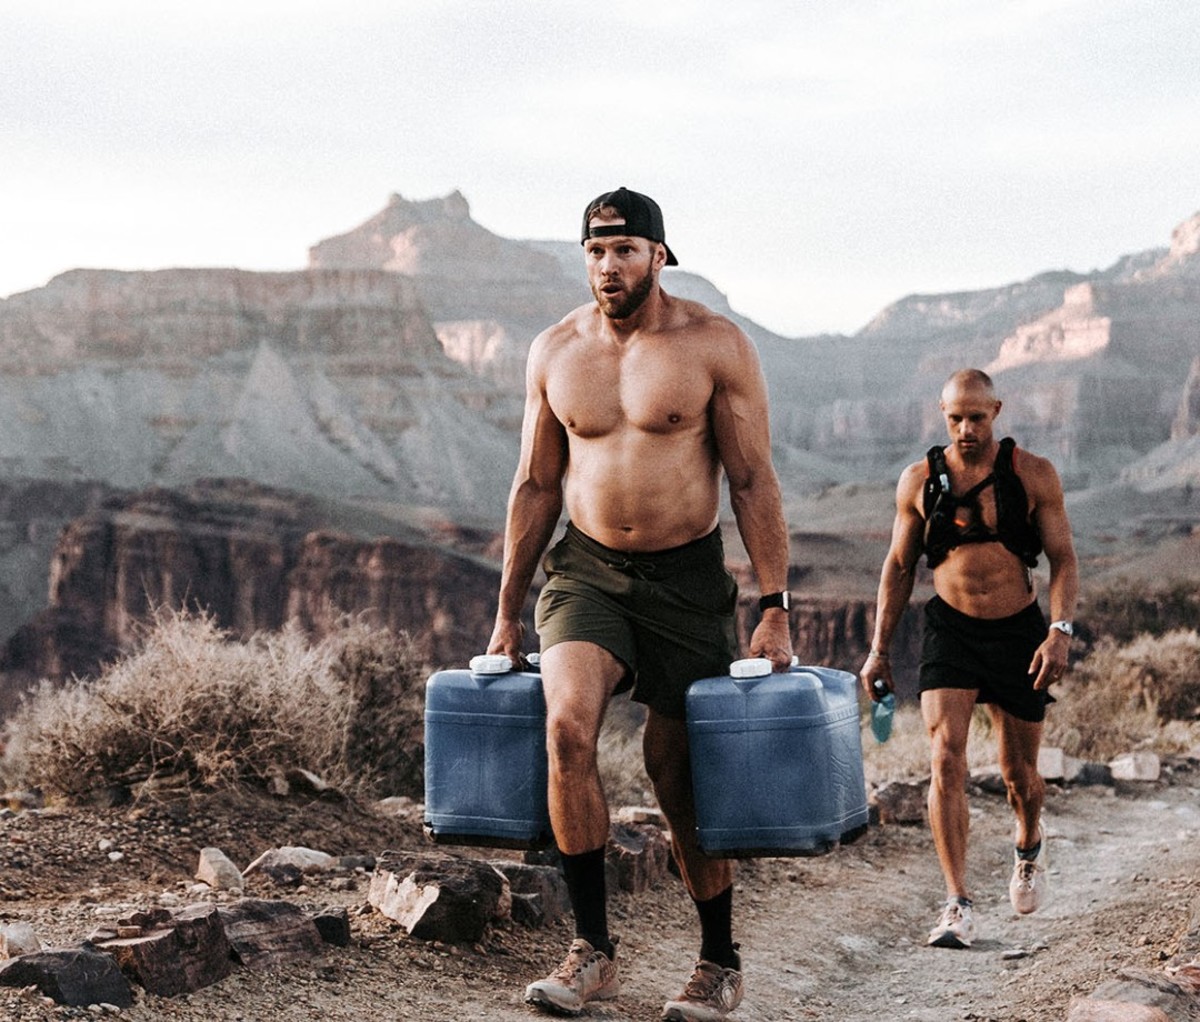 Man carries water jars up the Grand Canyon